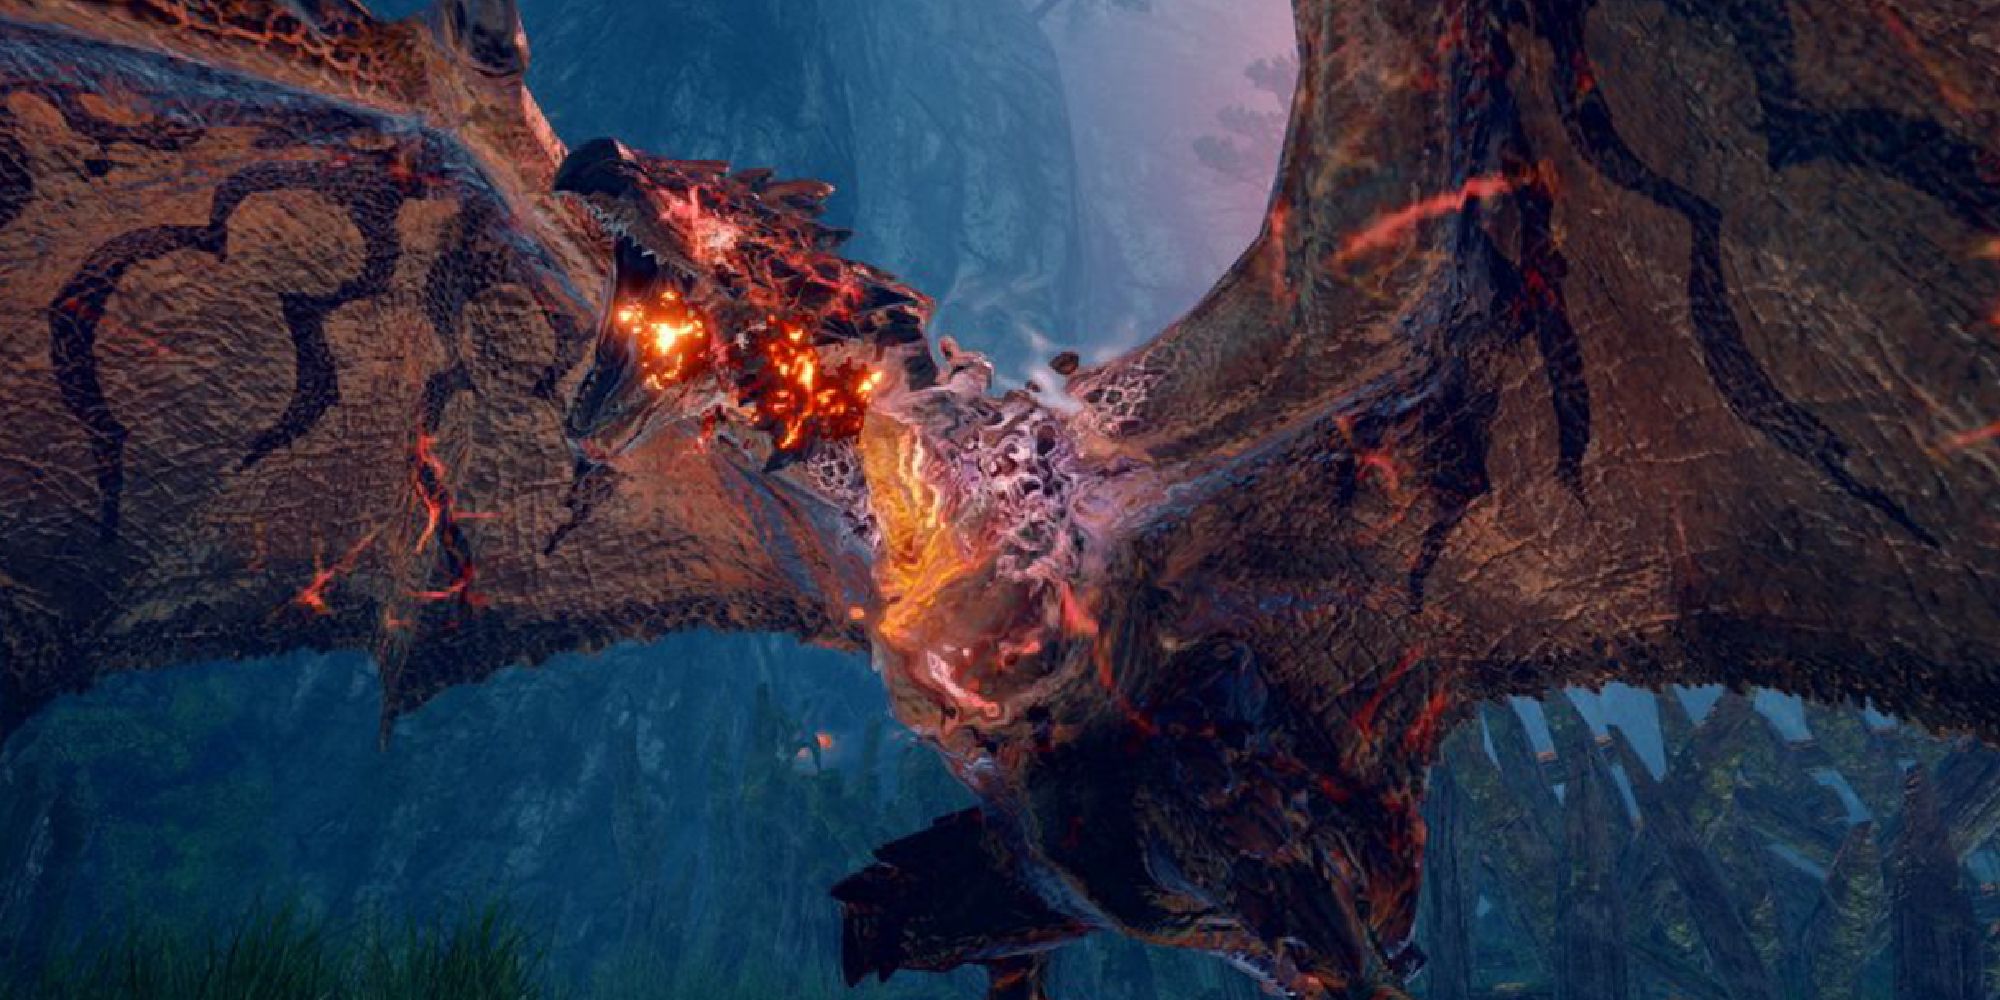 Apex Rathalos readying to shoot flame from its mouth at night